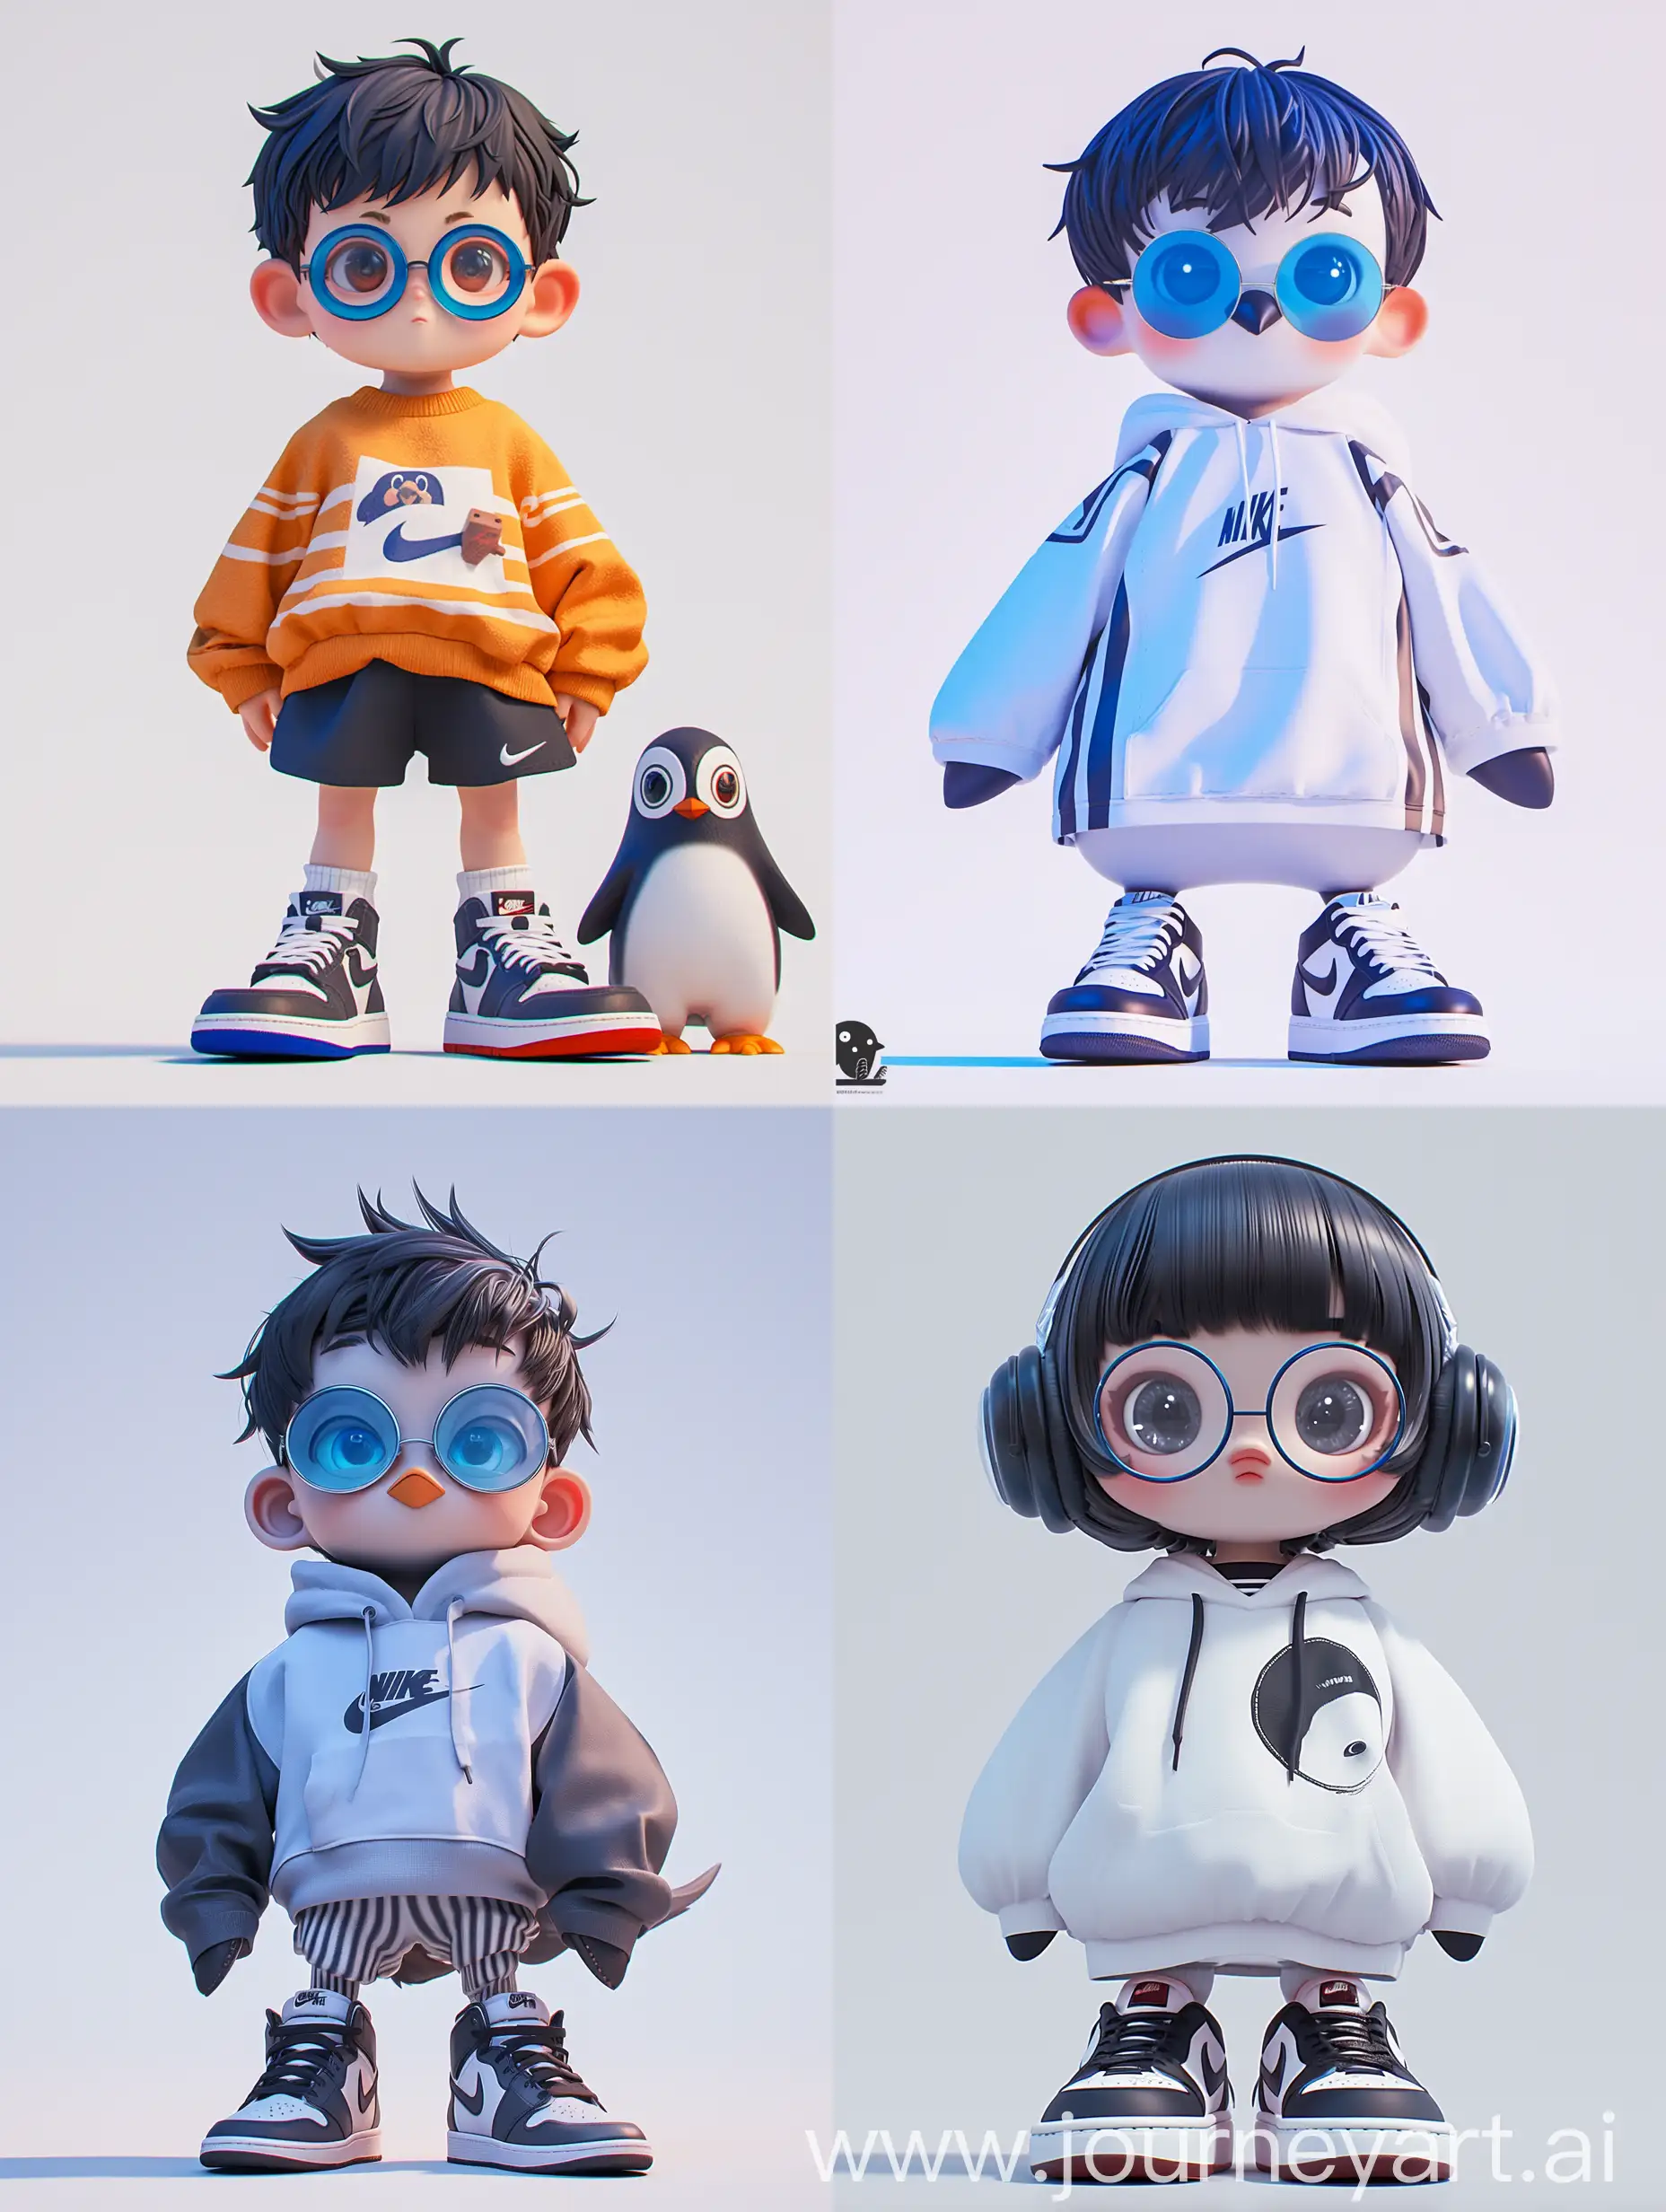 Cute-Tencent-QQ-Penguin-Character-with-Blue-Glasses-and-AJ1-Shoes-on-Clean-White-Background